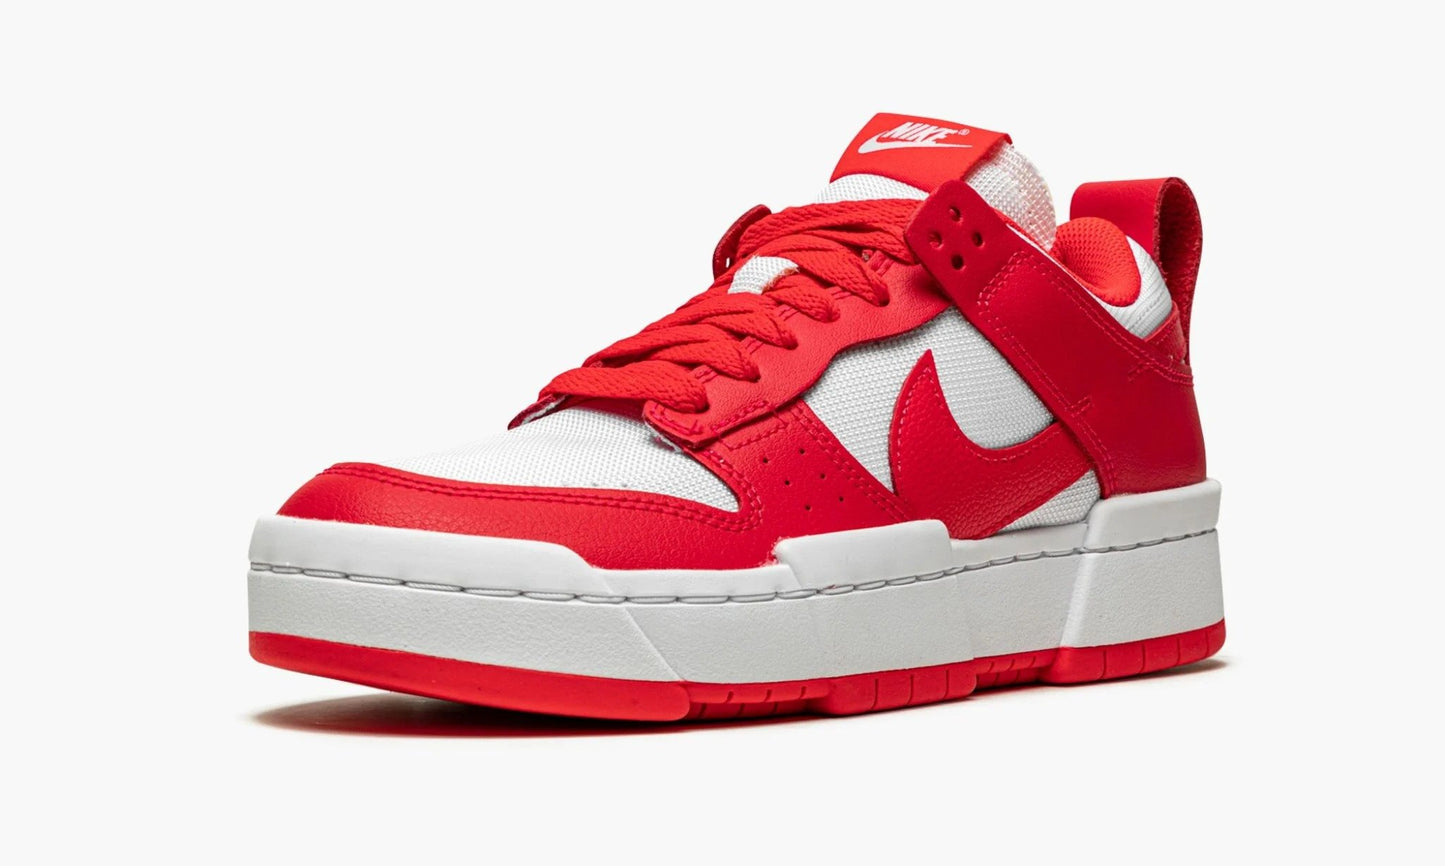 Dunk Low Disrupt WMNS "Siren Red"